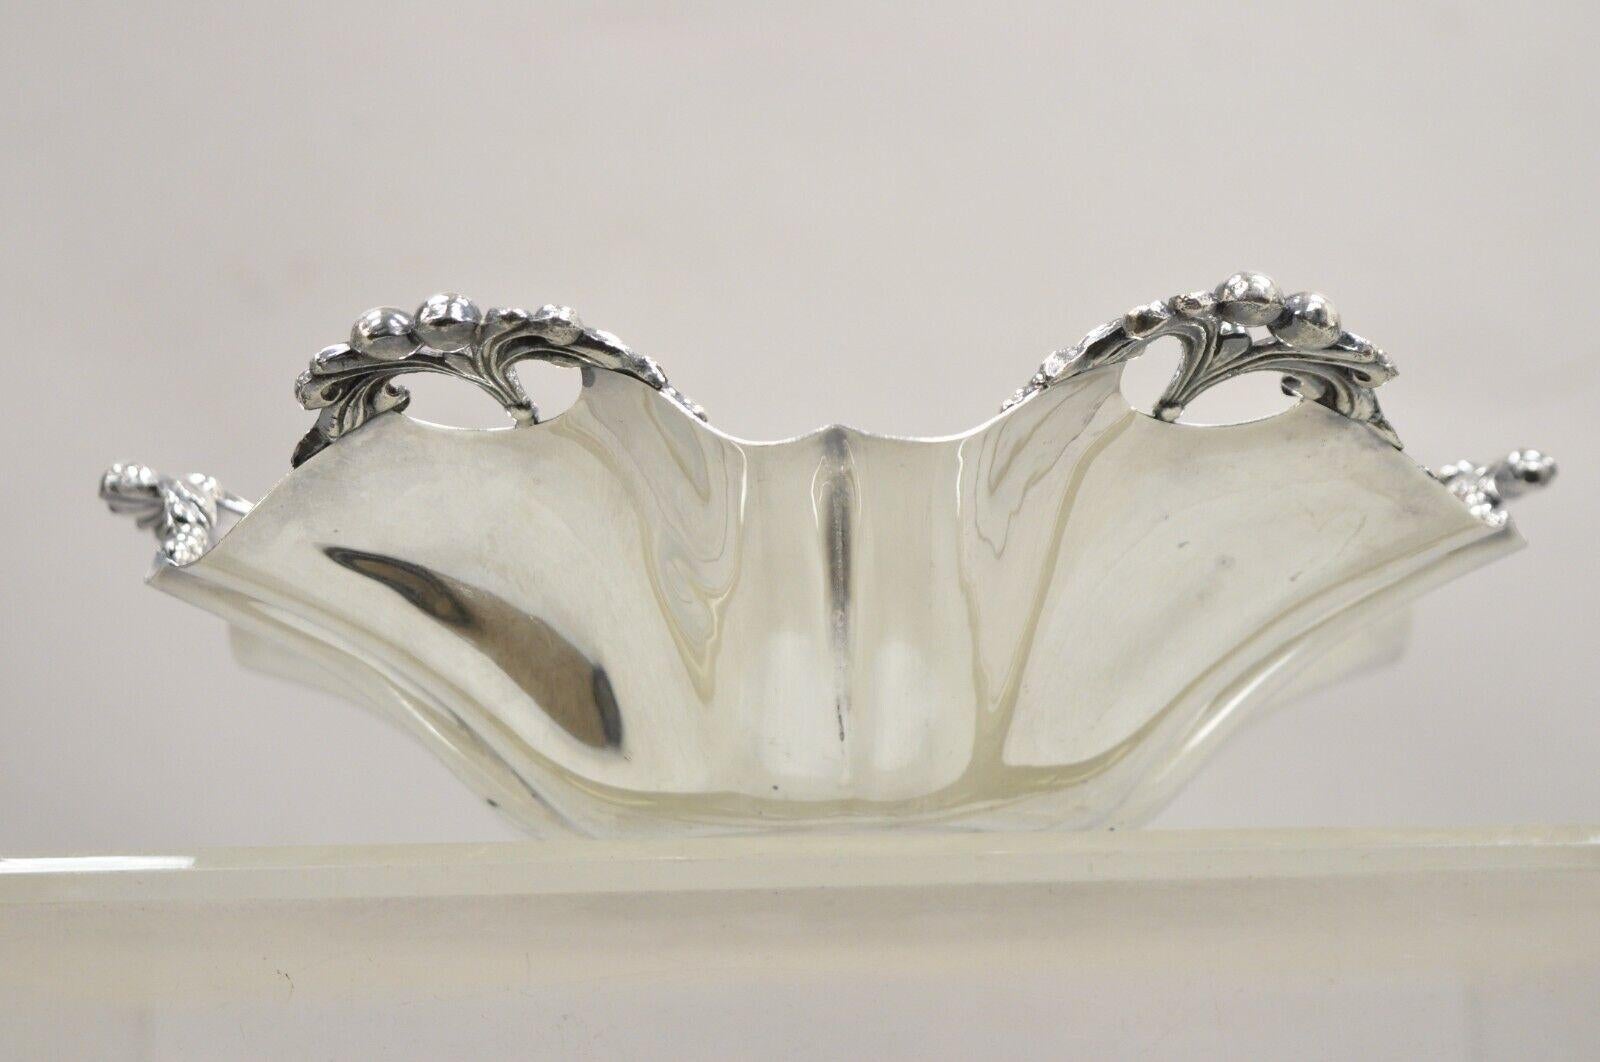 Vintage Victorian Silver Plated Handkerchief Candy Dish Fruit Bowl Berry Design For Sale 5